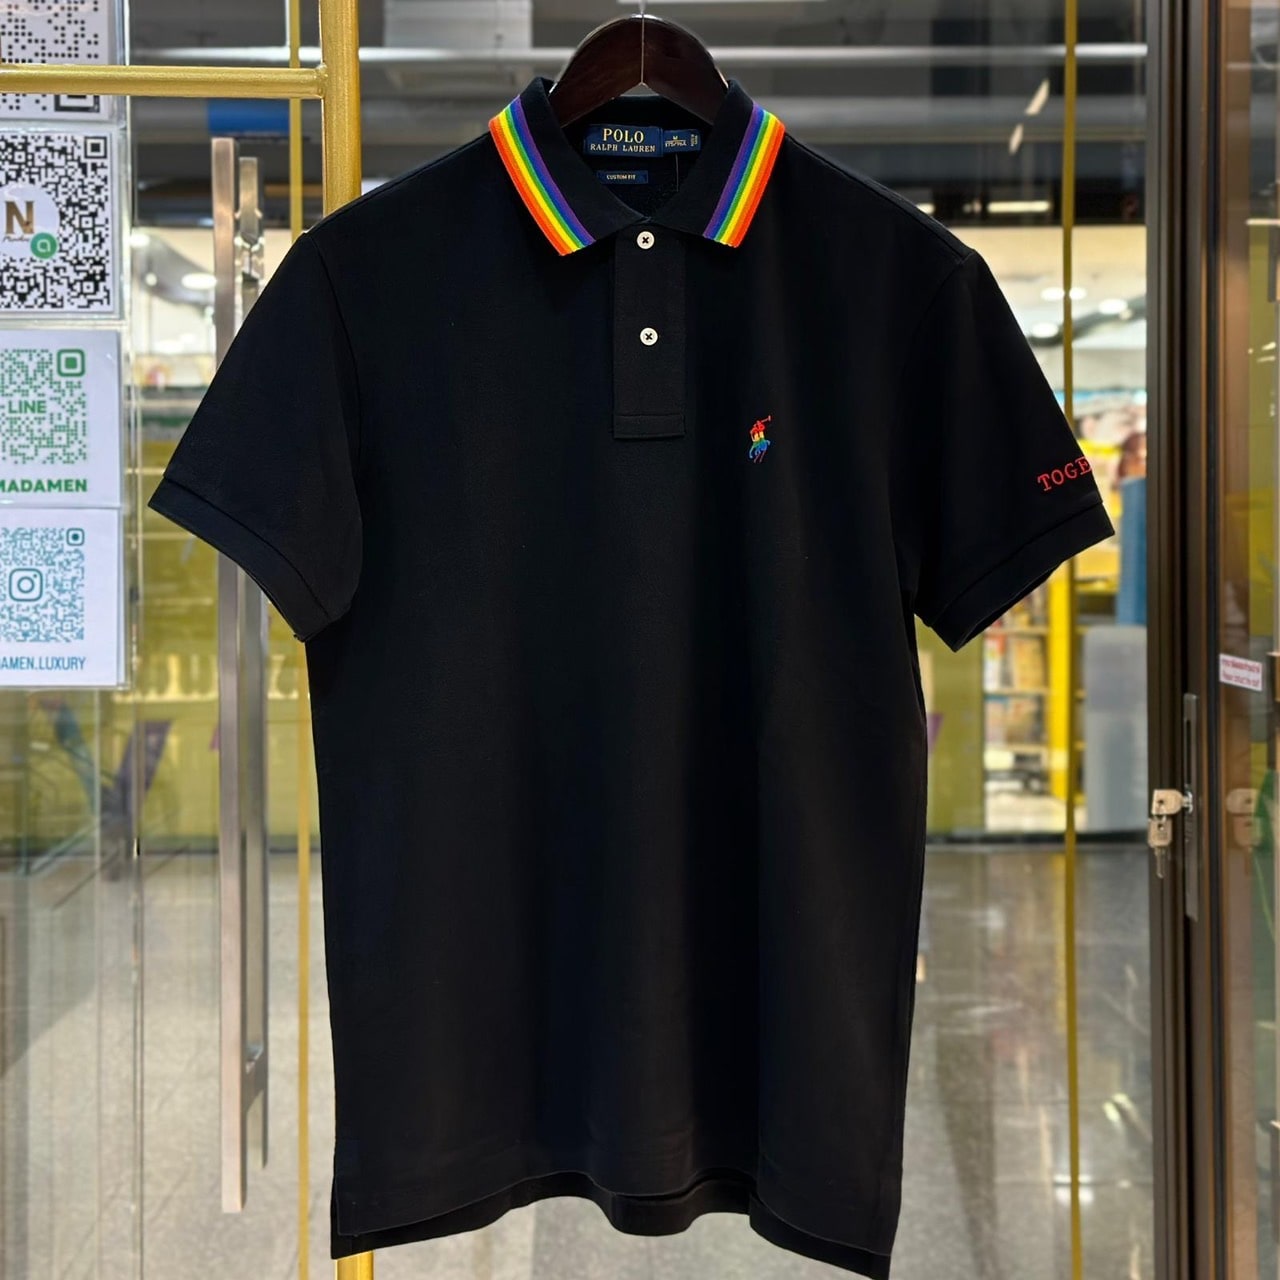 POLO RALPH LAUREN Pride Together Collection Polo Shirt - Madame N Luxury